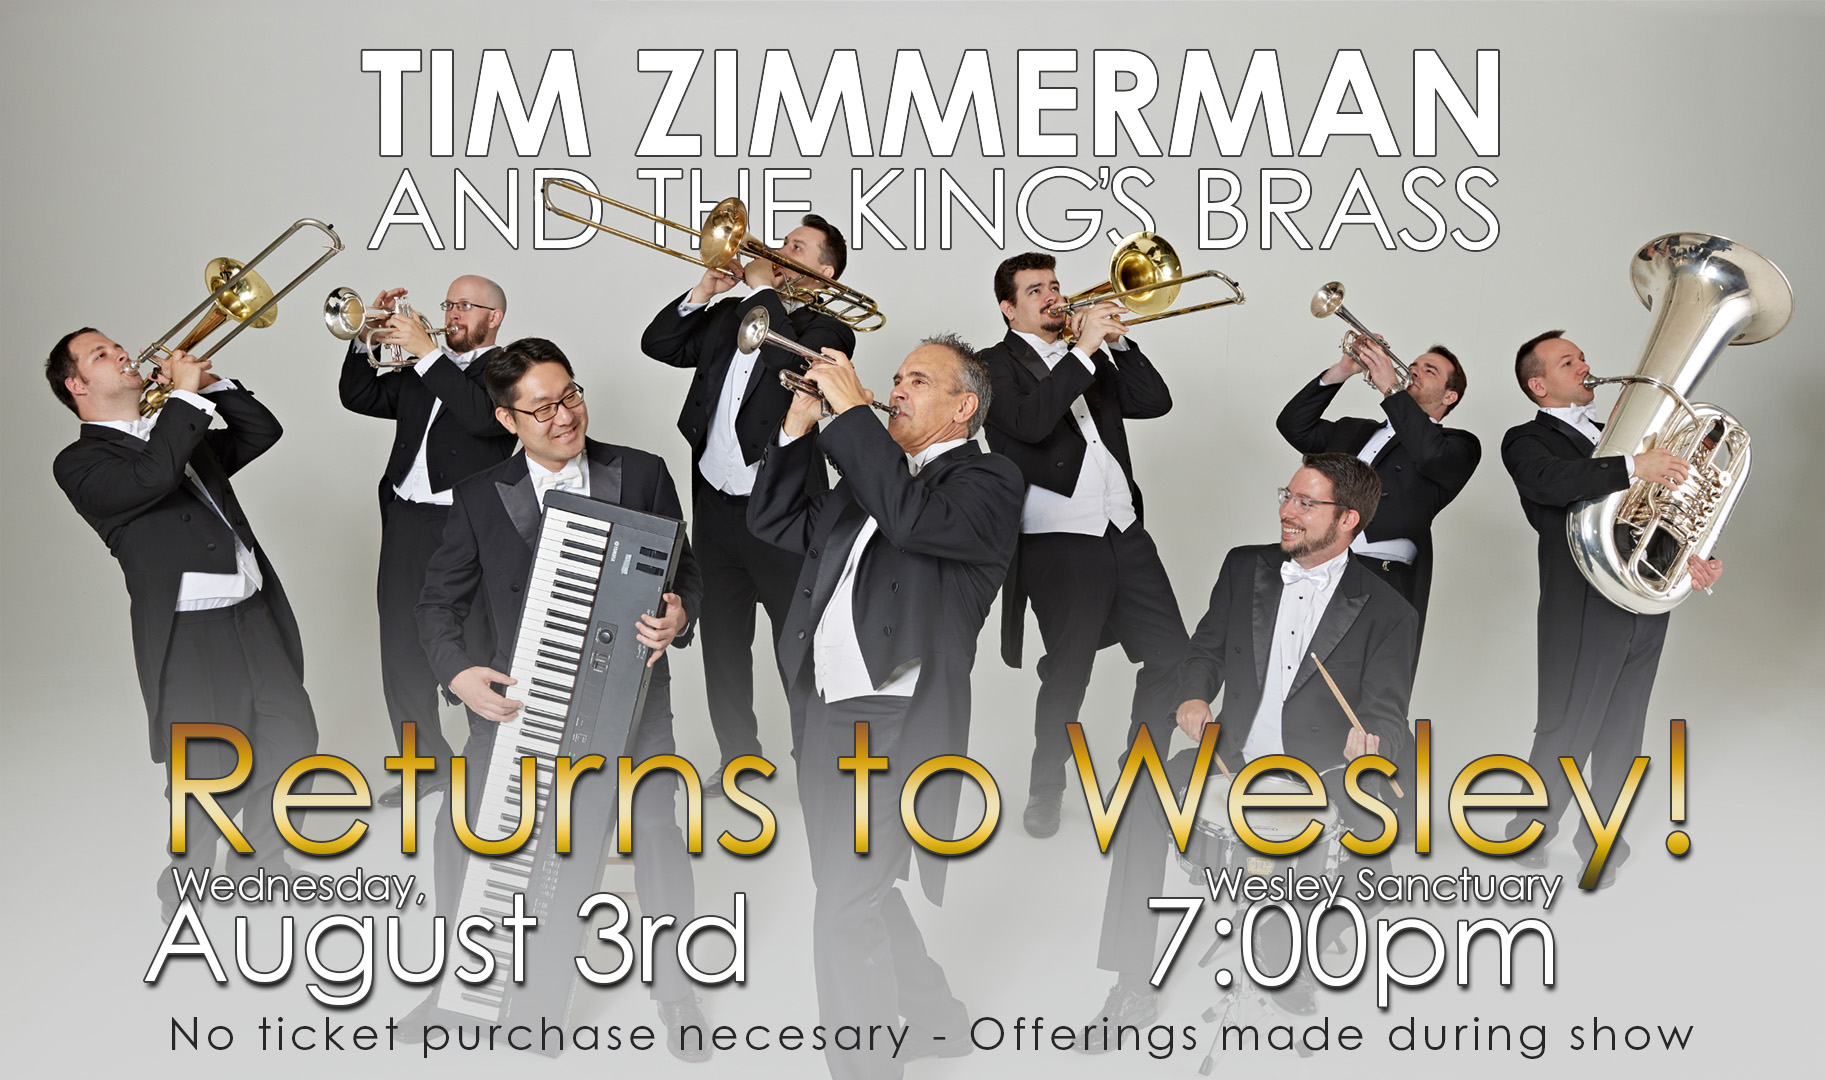 Tim Zimmerman and the King's Brass